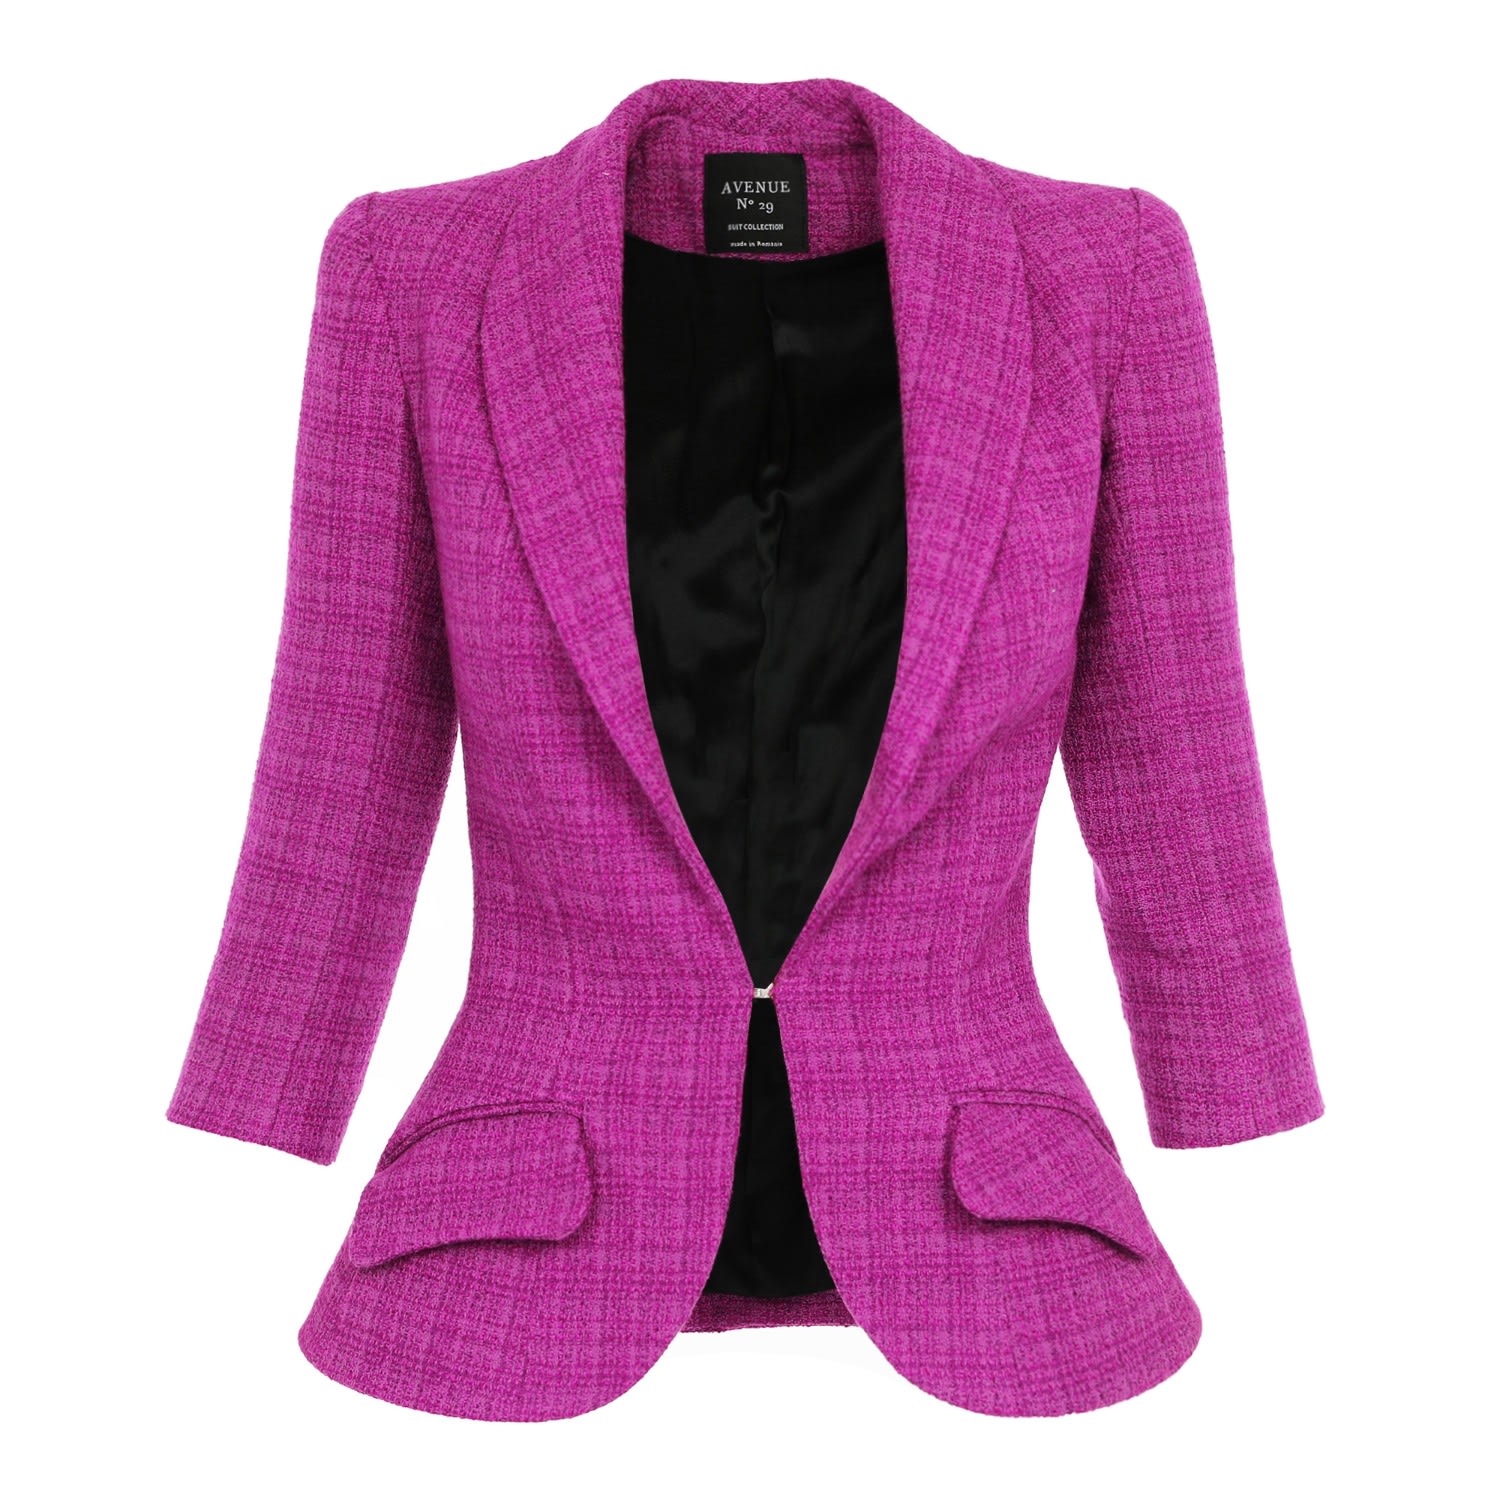 Women’s Pink / Purple Structured Boucle Blazer - Pink & Purple Extra Small Avenue no.29